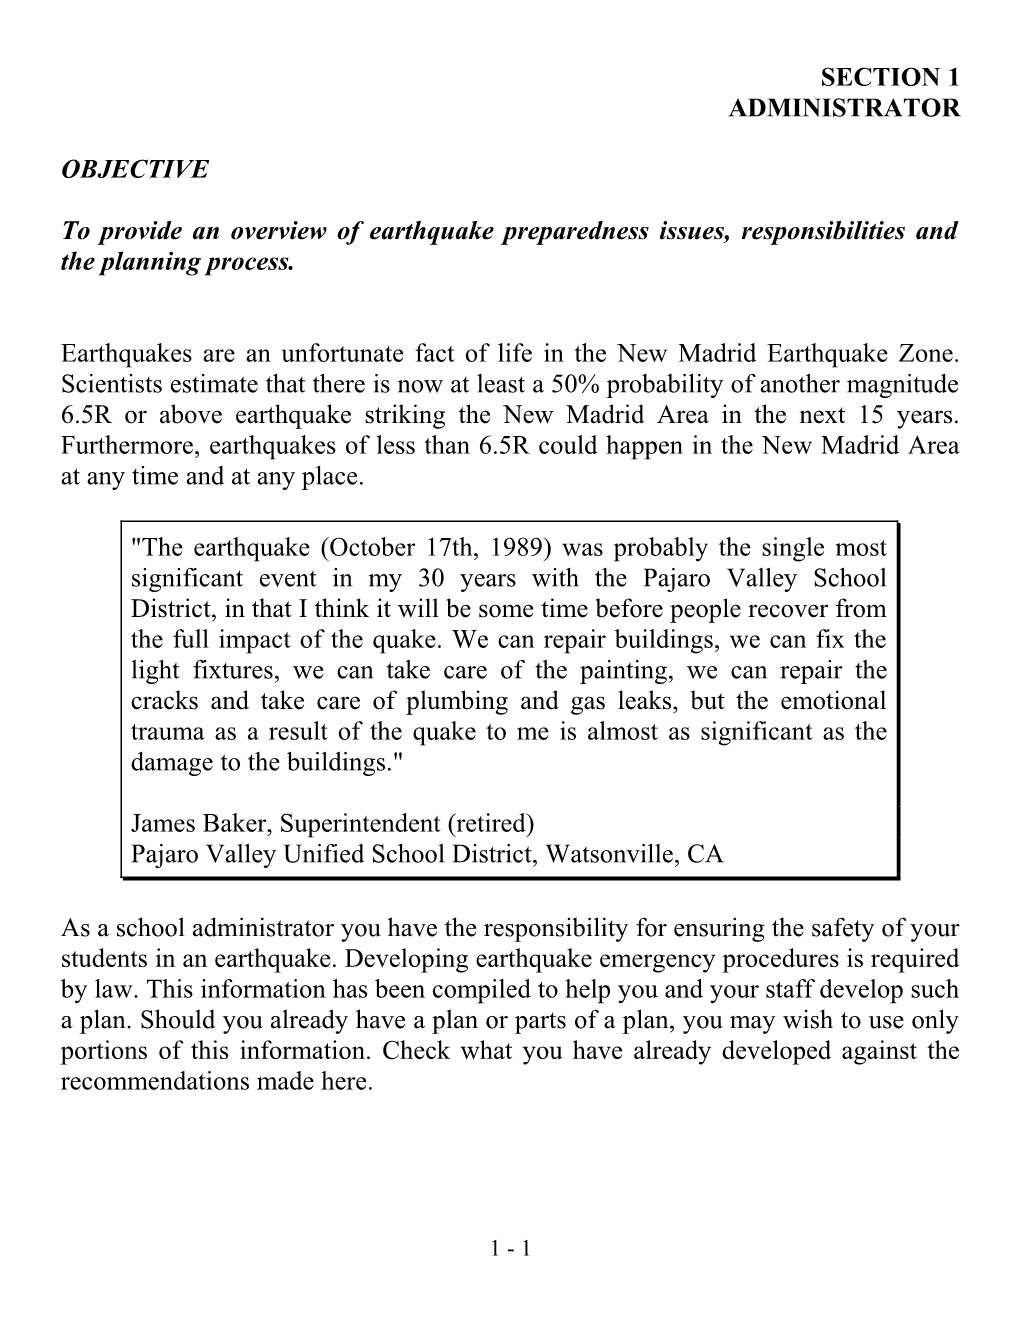 To Provide an Overview of Earthquake Preparedness Issues, Responsibilities and the Planning